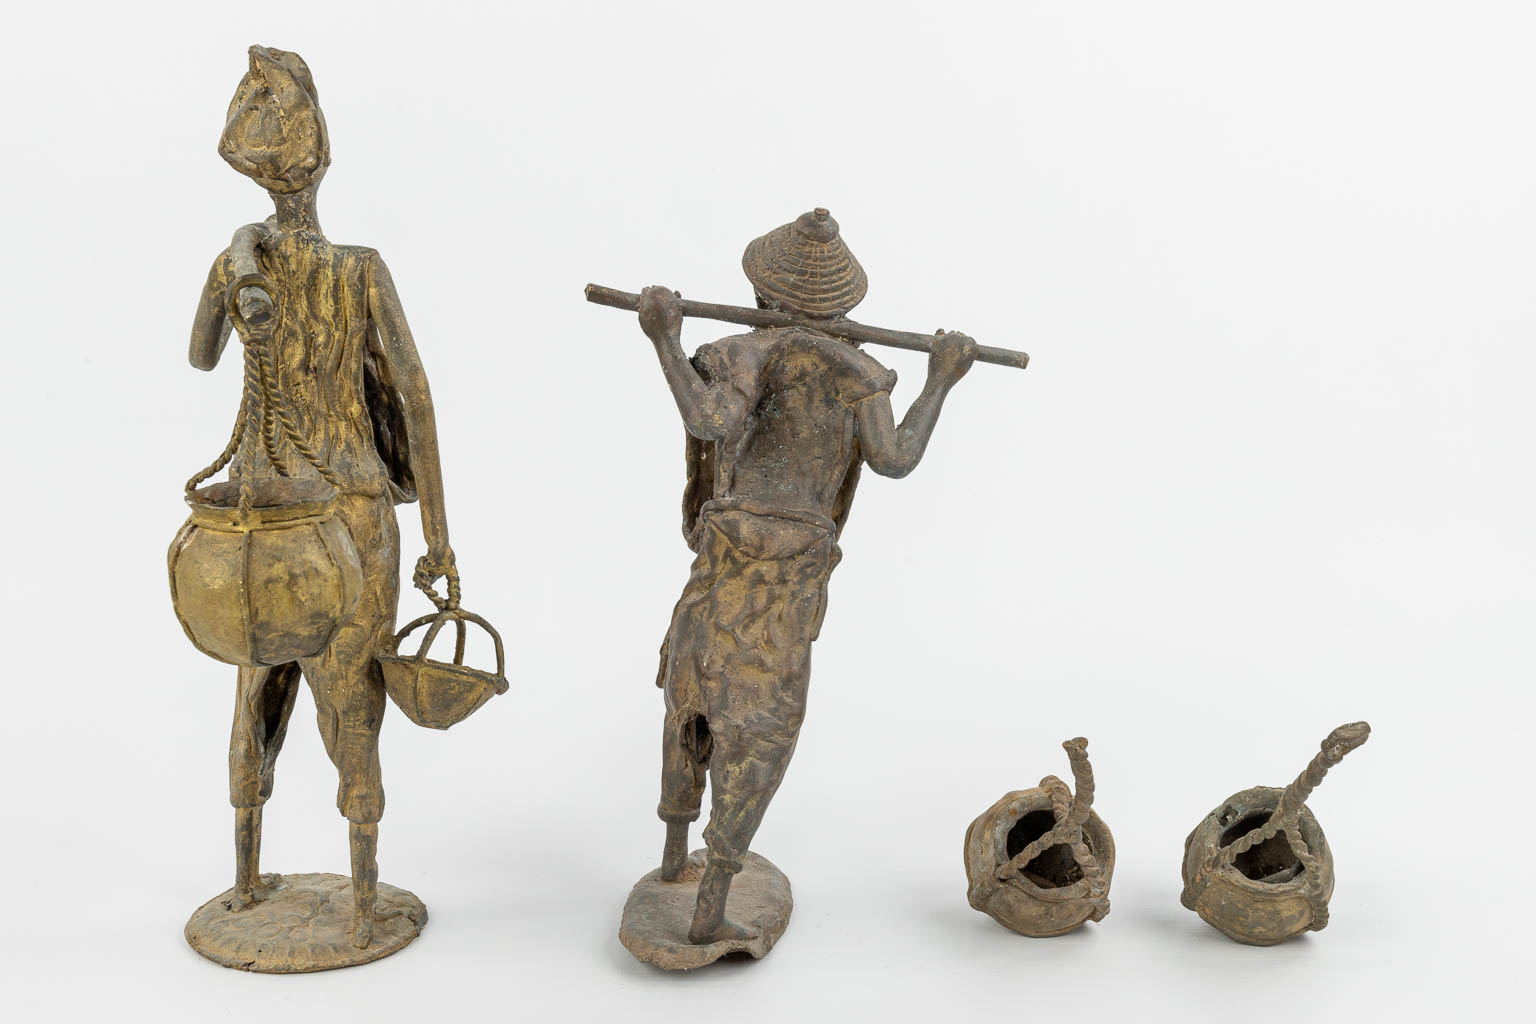 A set of 2 bronze statues of Asian figurines with baskets. (H:36cm)